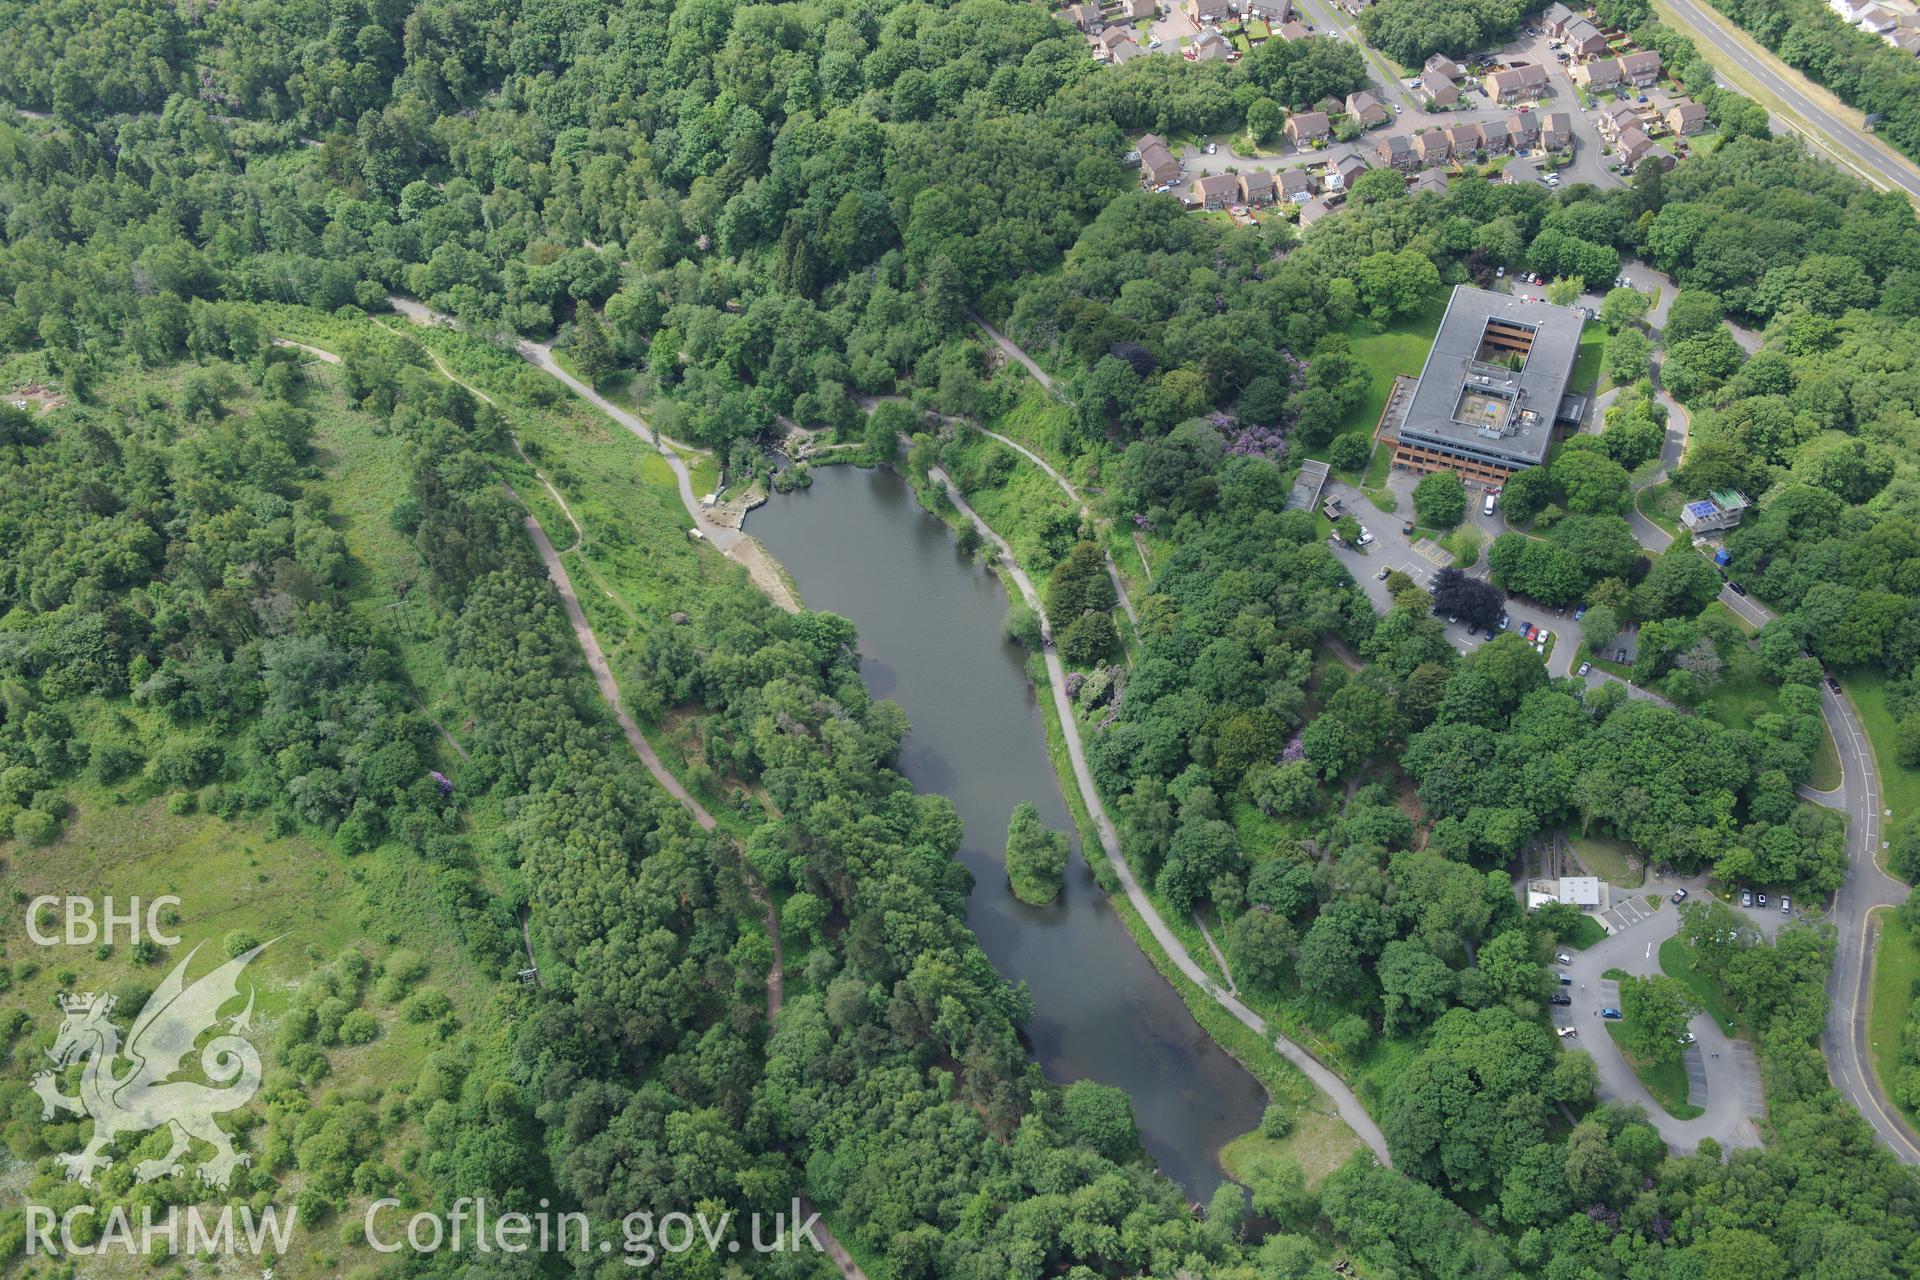 The Equatorial Observatory; Lliw Valley (or Penllergaer) civic centre and the site of Penllergaer House at Penllergaeth Park, Swansea. Oblique aerial photograph taken during the Royal Commission's programme of archaeological aerial reconnaissance by Toby Driver on 19th June 2015.